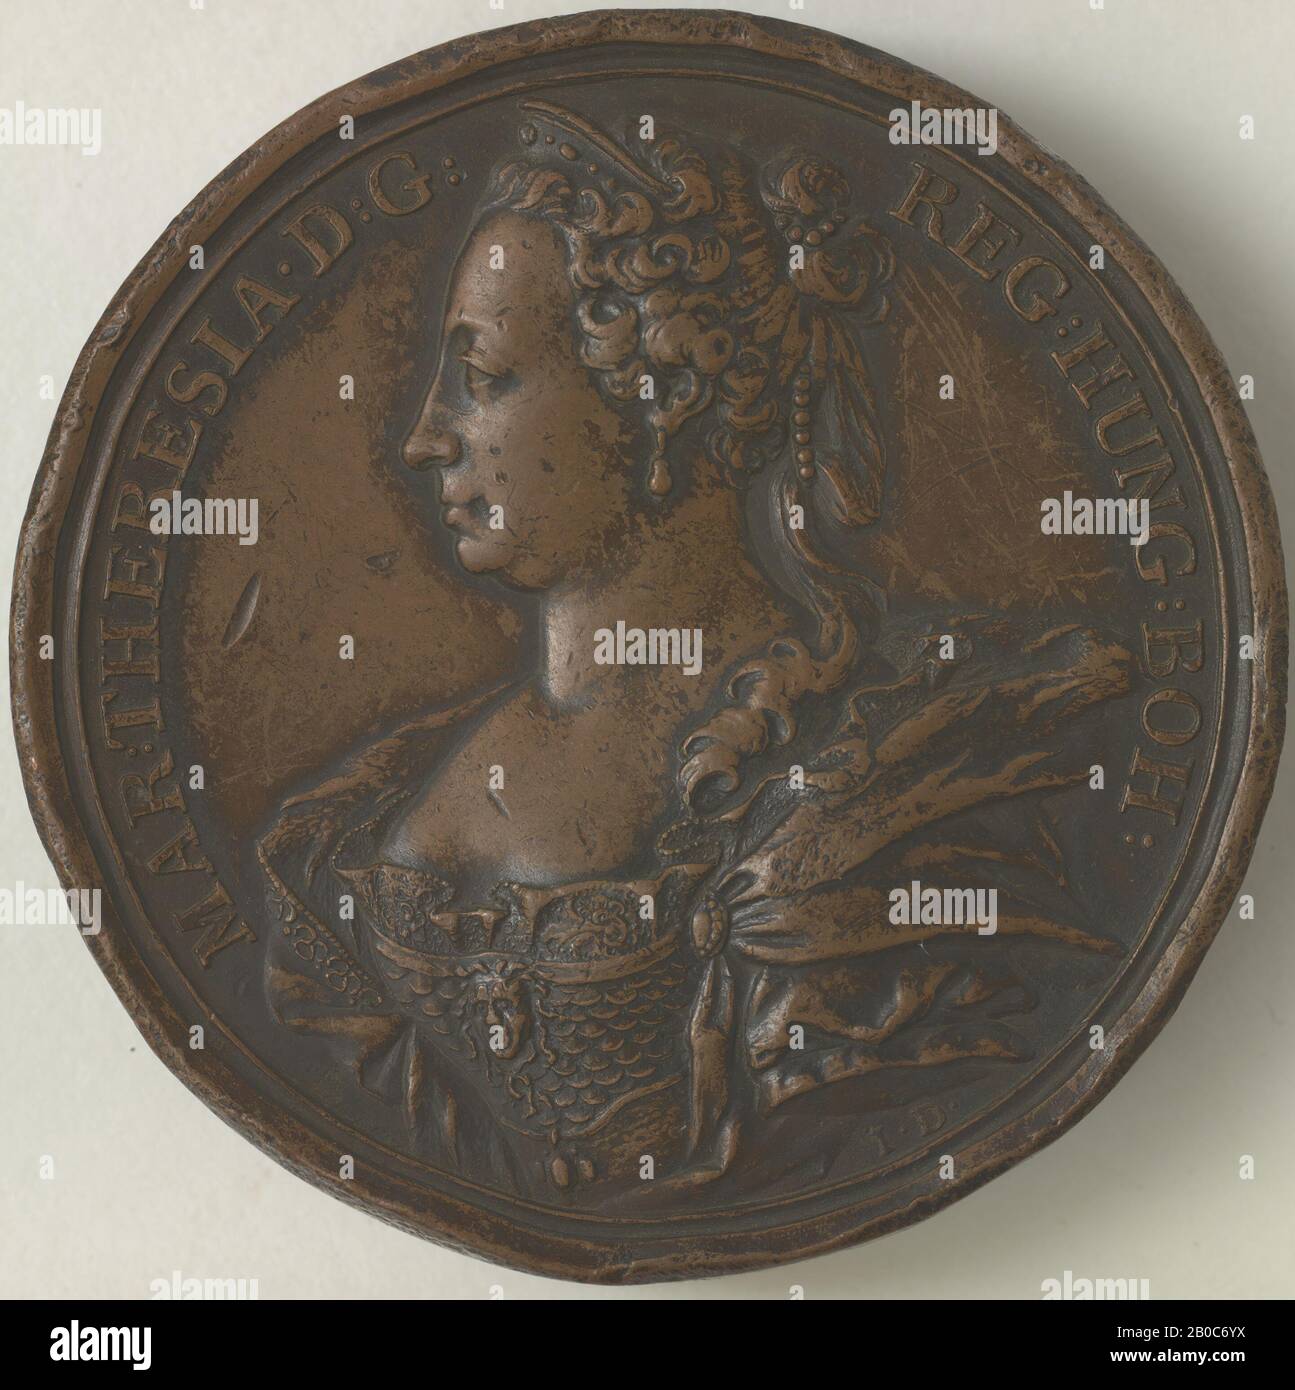 Jacques Antoine Dassier, Maria Theresa (1717-1780), Archduchess of Austria and Queen of Hungary and Bohemia 1740-1780, Treaty of Fuessen, 1745, bronze, traces of black patina, 3 15/16 in. (10 cm.), Empress Maria Theresa of the Austrian Habsburg line ascended to the throne of the Holy Roman Empire in 1740. An alliance of European powers immediately challenged her sovereignty, citing her ineligibility as a woman and prompting the War of the Austrian Succession (1740-1748). This medal commemorates the 1745 Treaty of Fuessen, which ended Bavaria's participation in the war, a decisive moment leadin Stock Photo